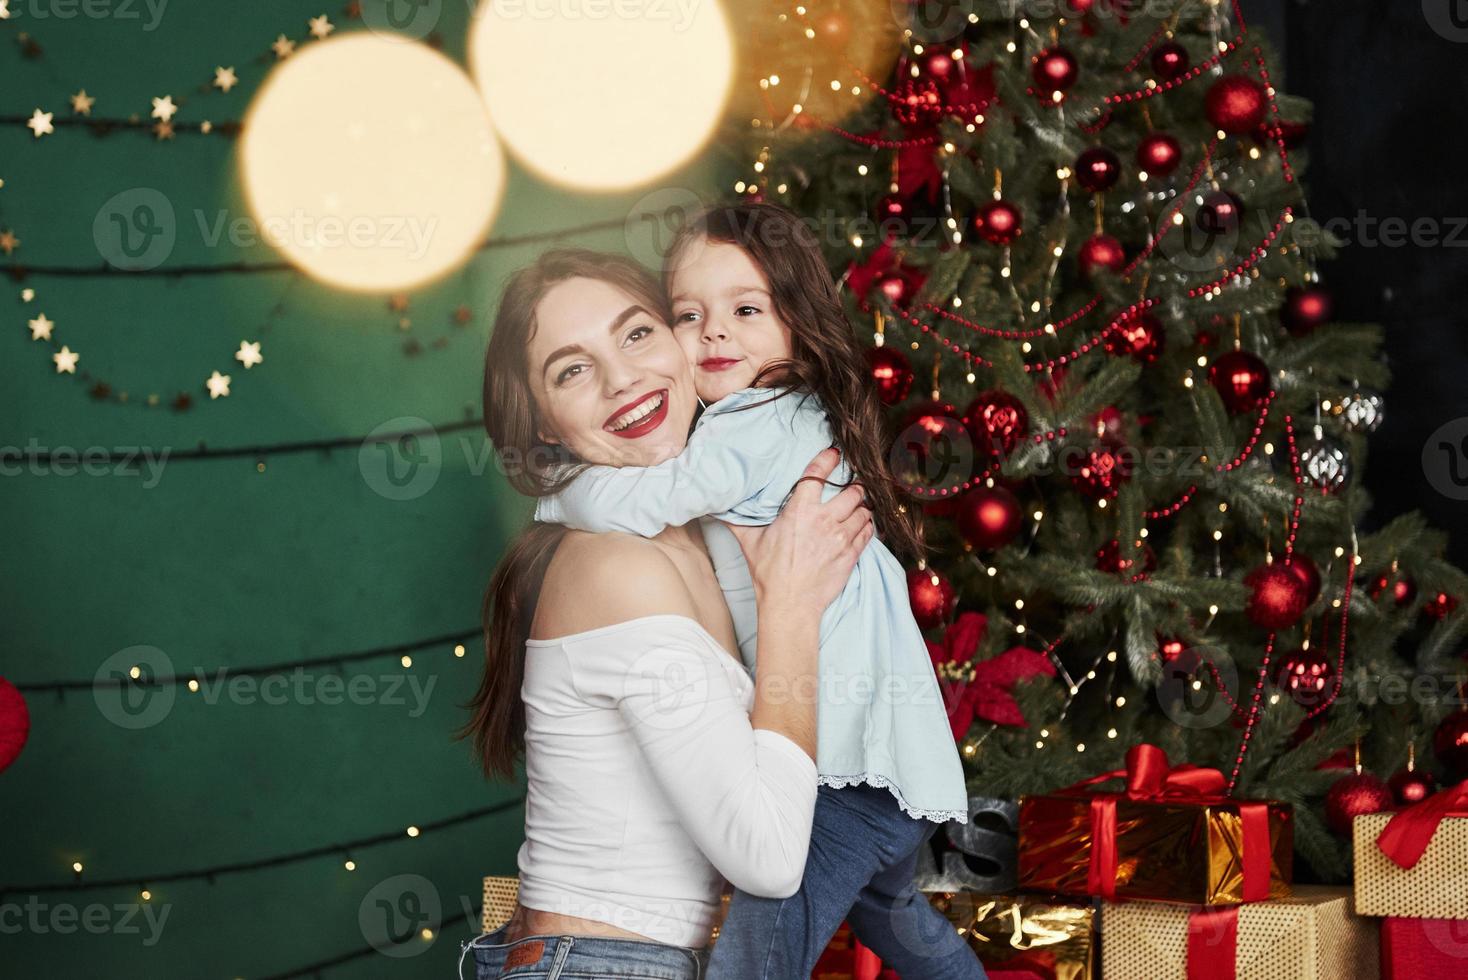 Perfect lighting. Cheerful mother and daughter hugging each other near the Christmas tree that behind. Cute portrait photo